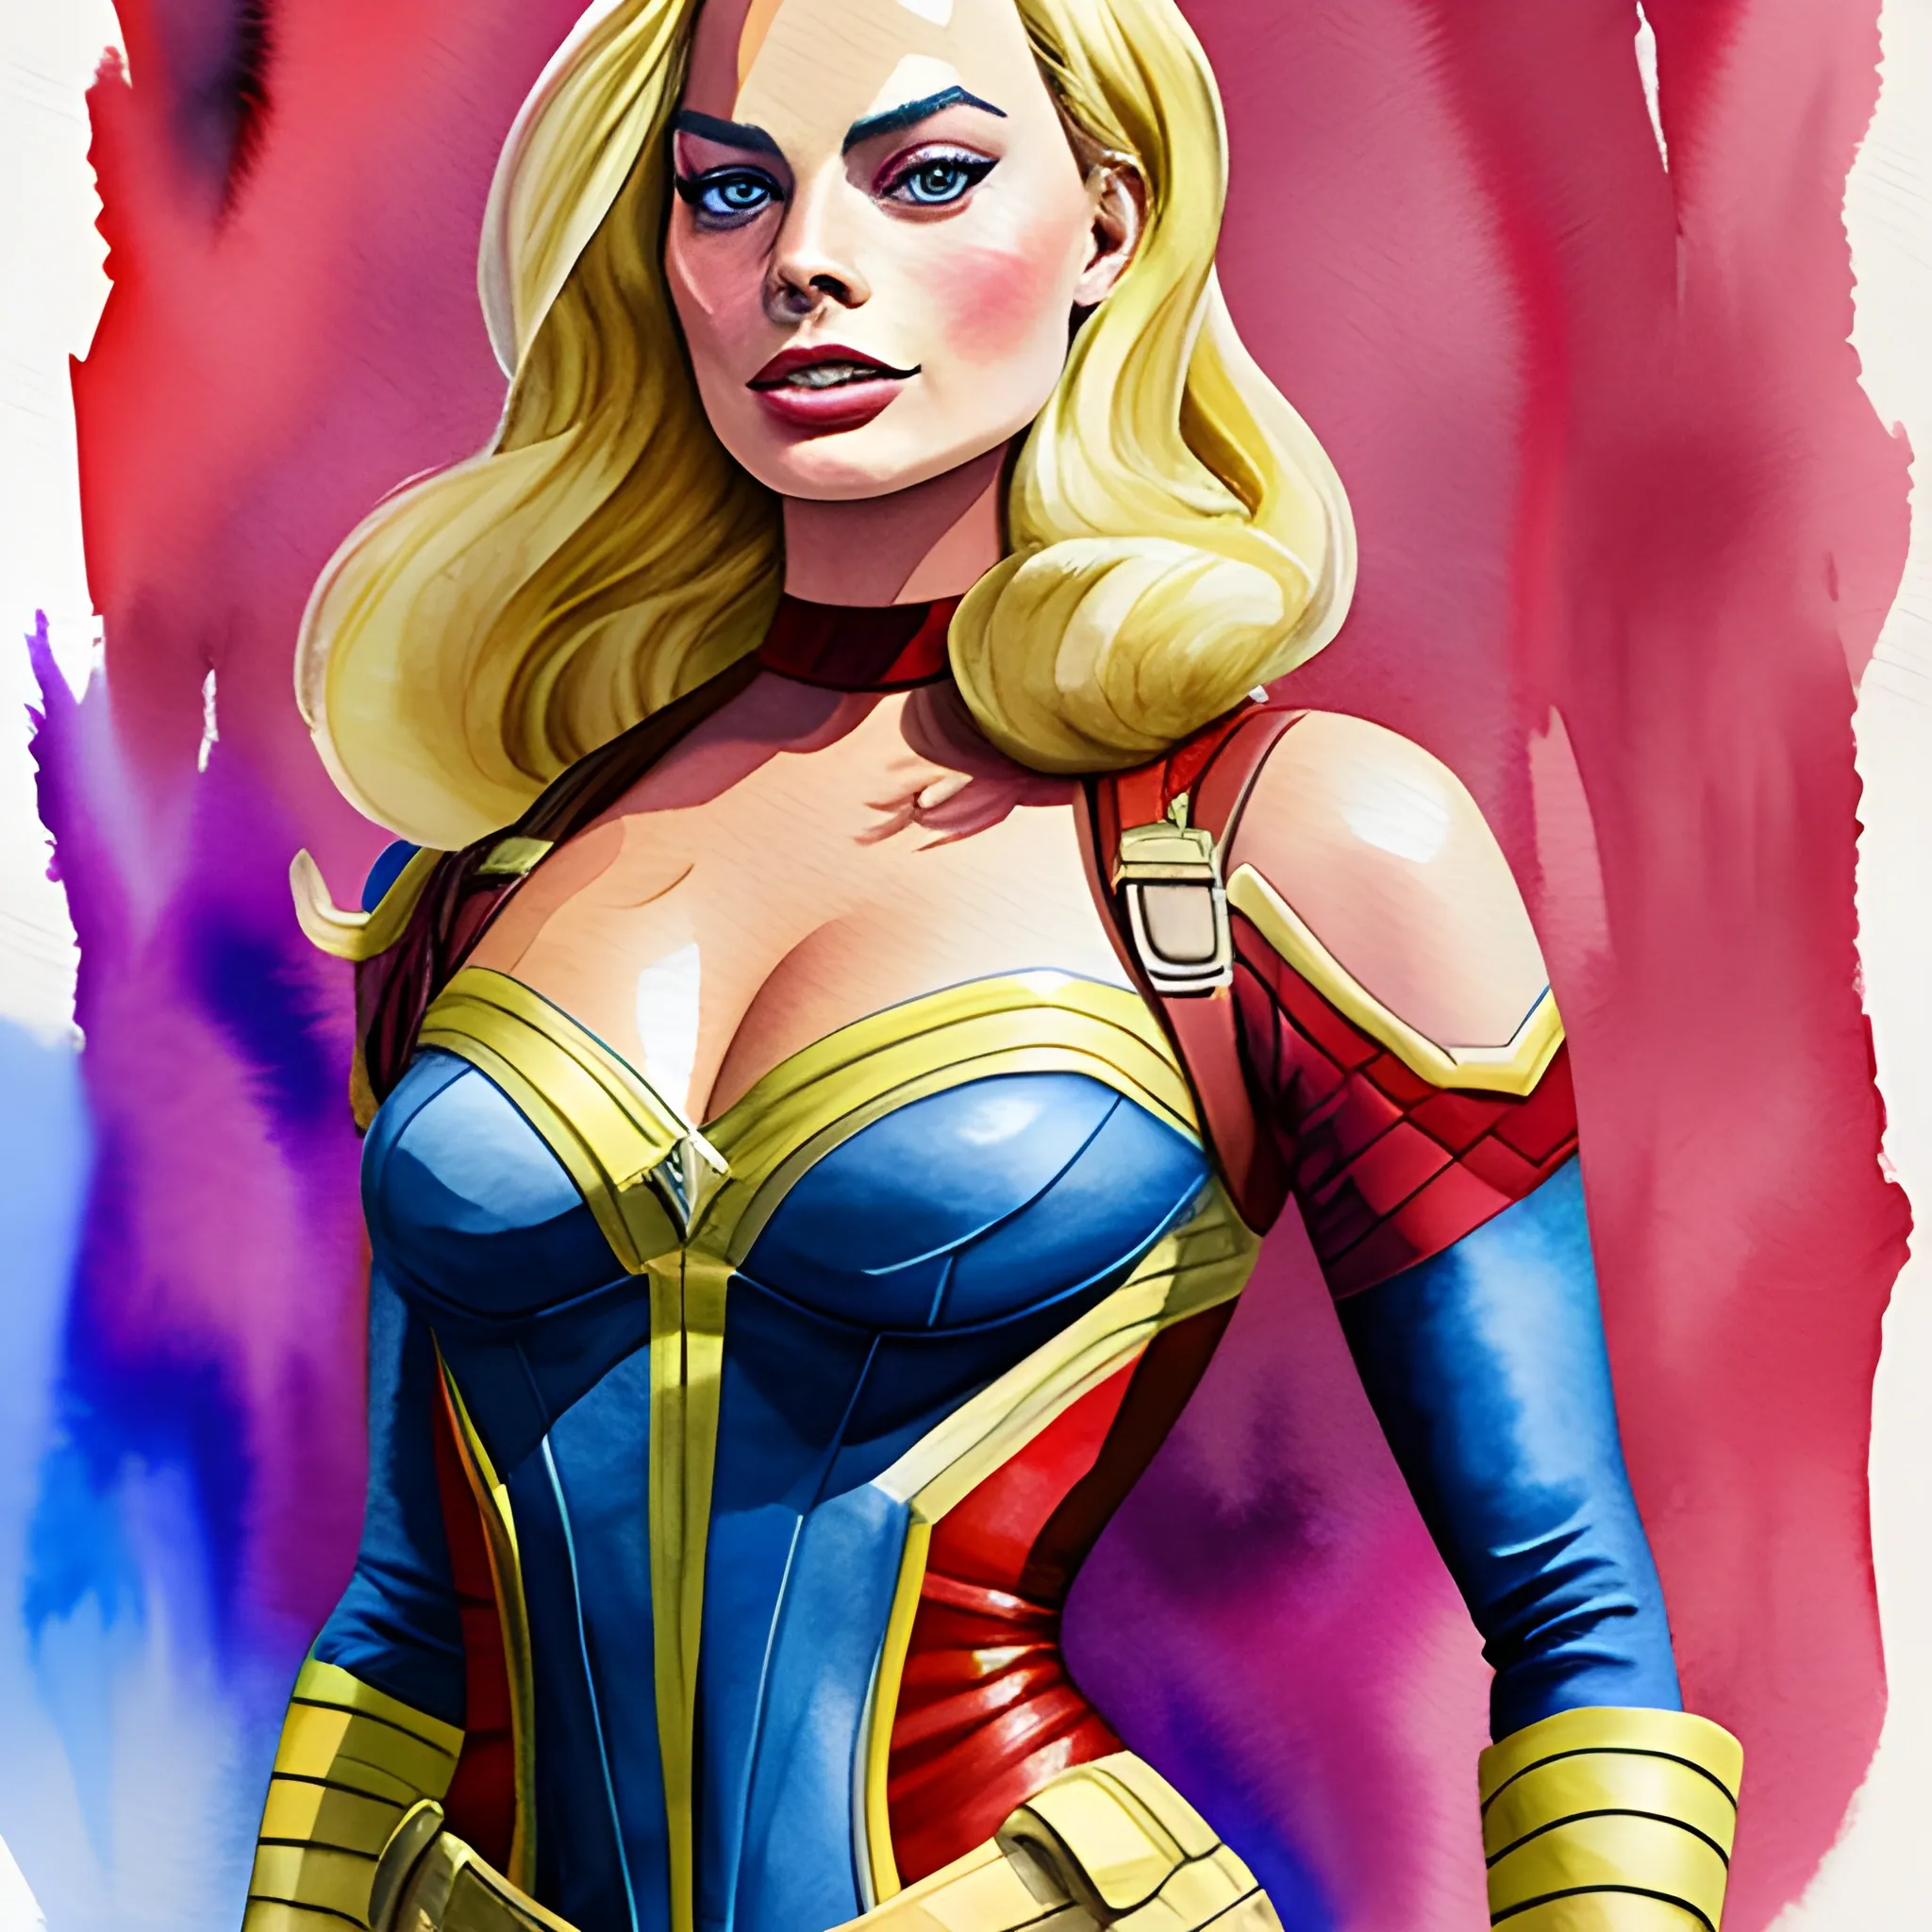 Margot Robbie as Capitana Marvel characters, Watercolor